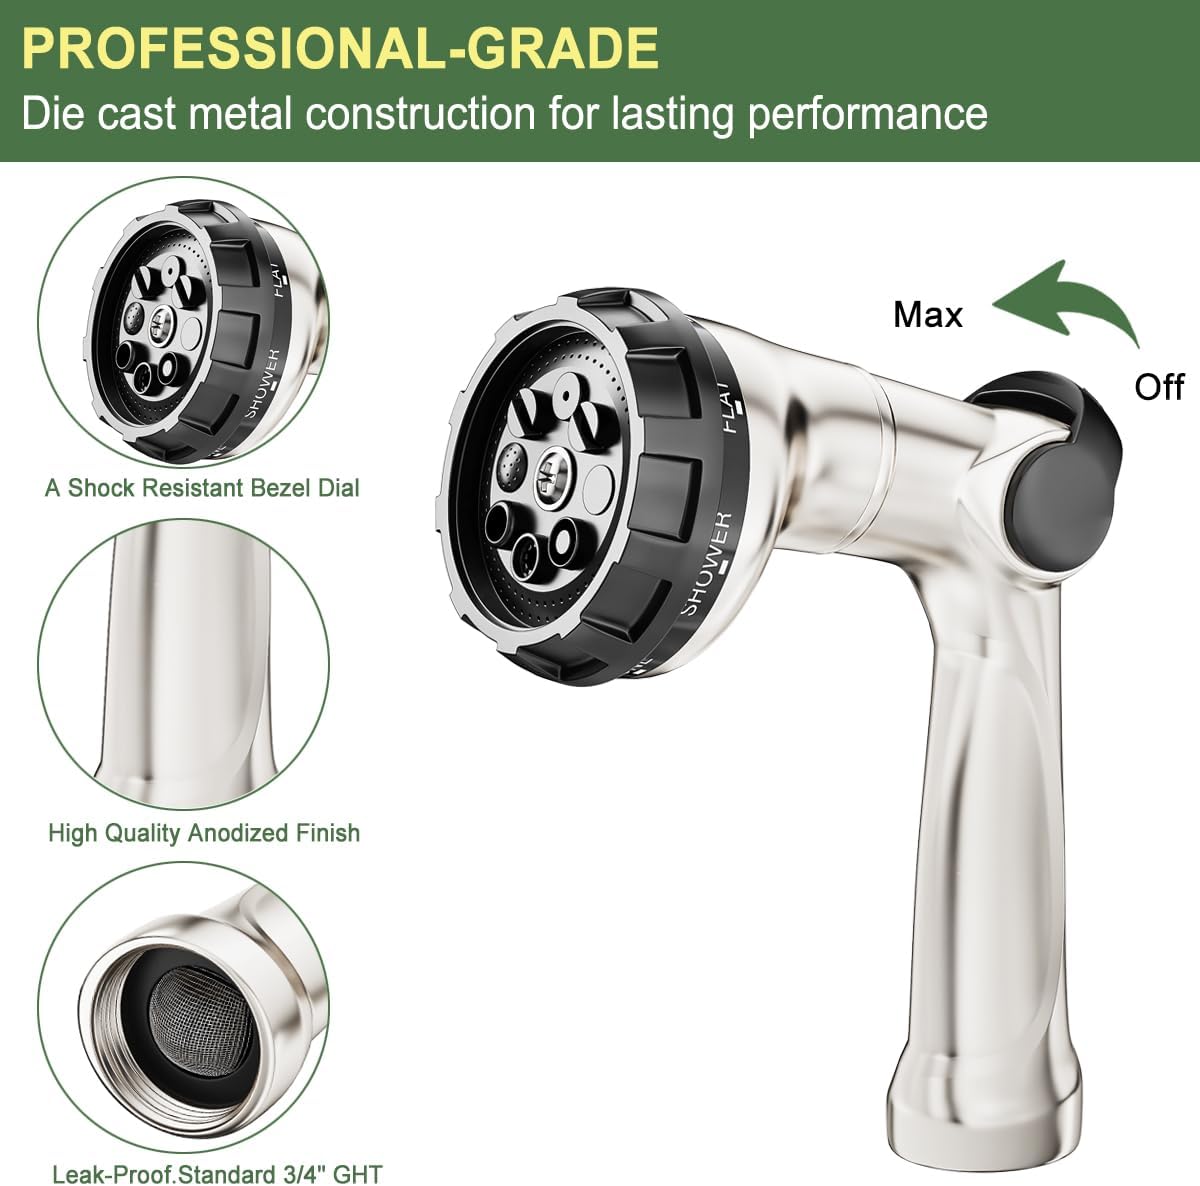 FANHAO Professional Heavy Duty Garden Hose Nozzle, 100% Metal Thumb Control Water Hose Sprayer with 8 Spray Patterns